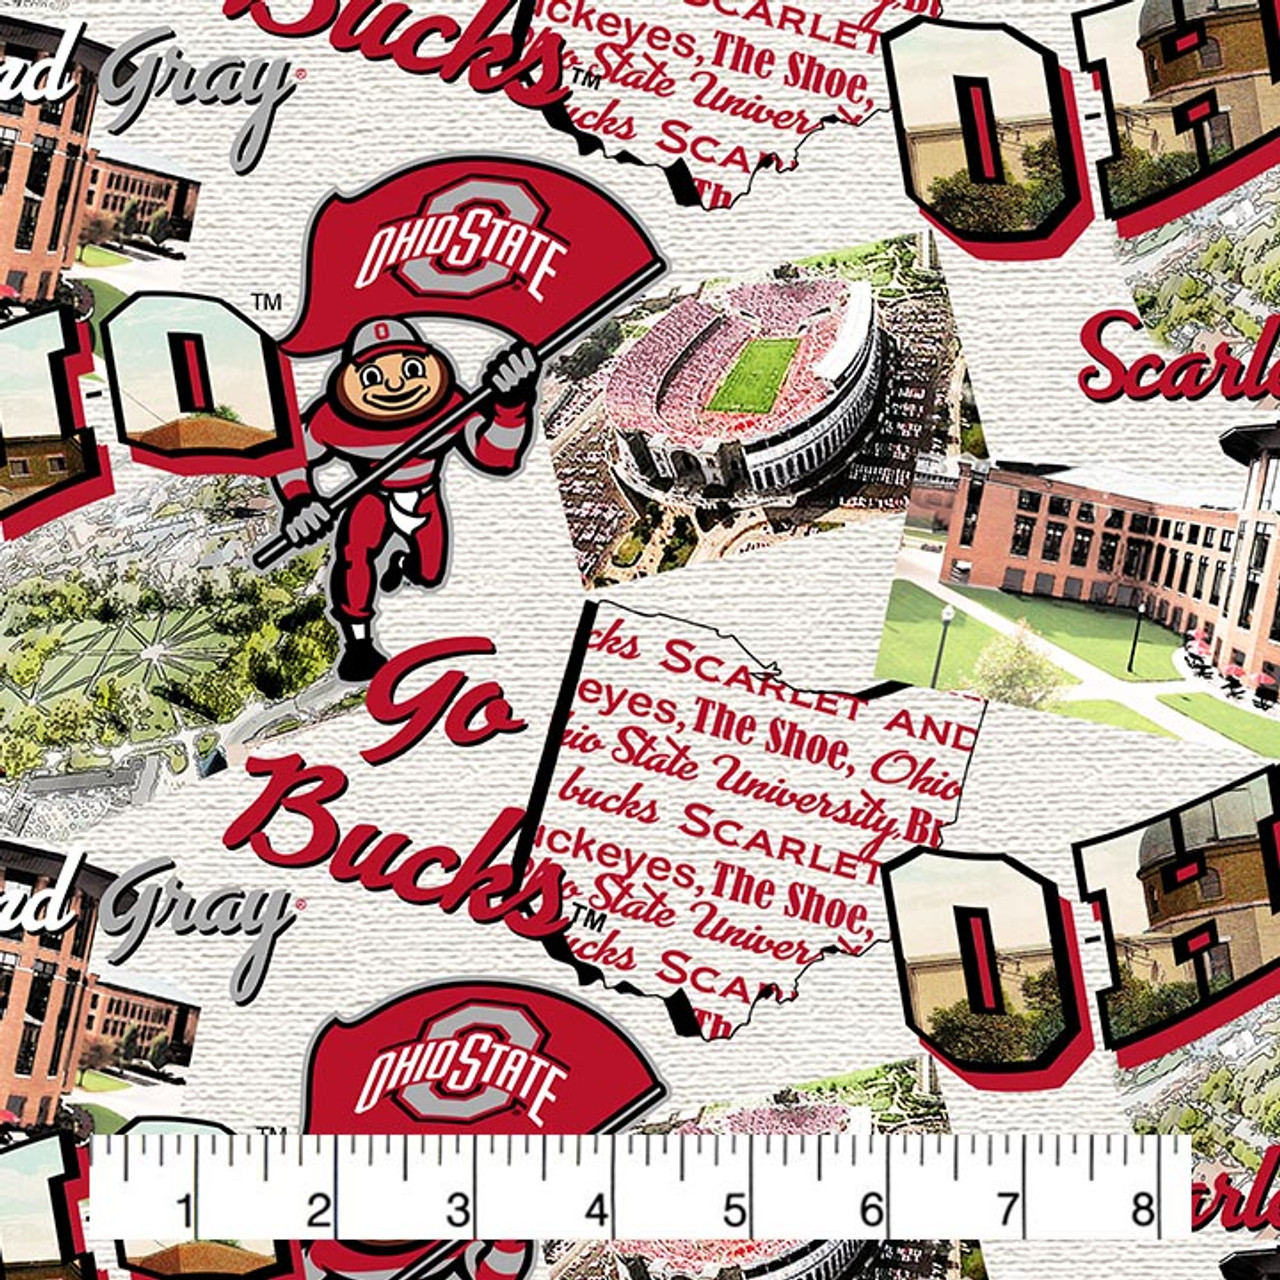 Ohio State University Buckeyes Cotton Fabric with Scenic Map Print or Matching Solid Cotton Fabrics